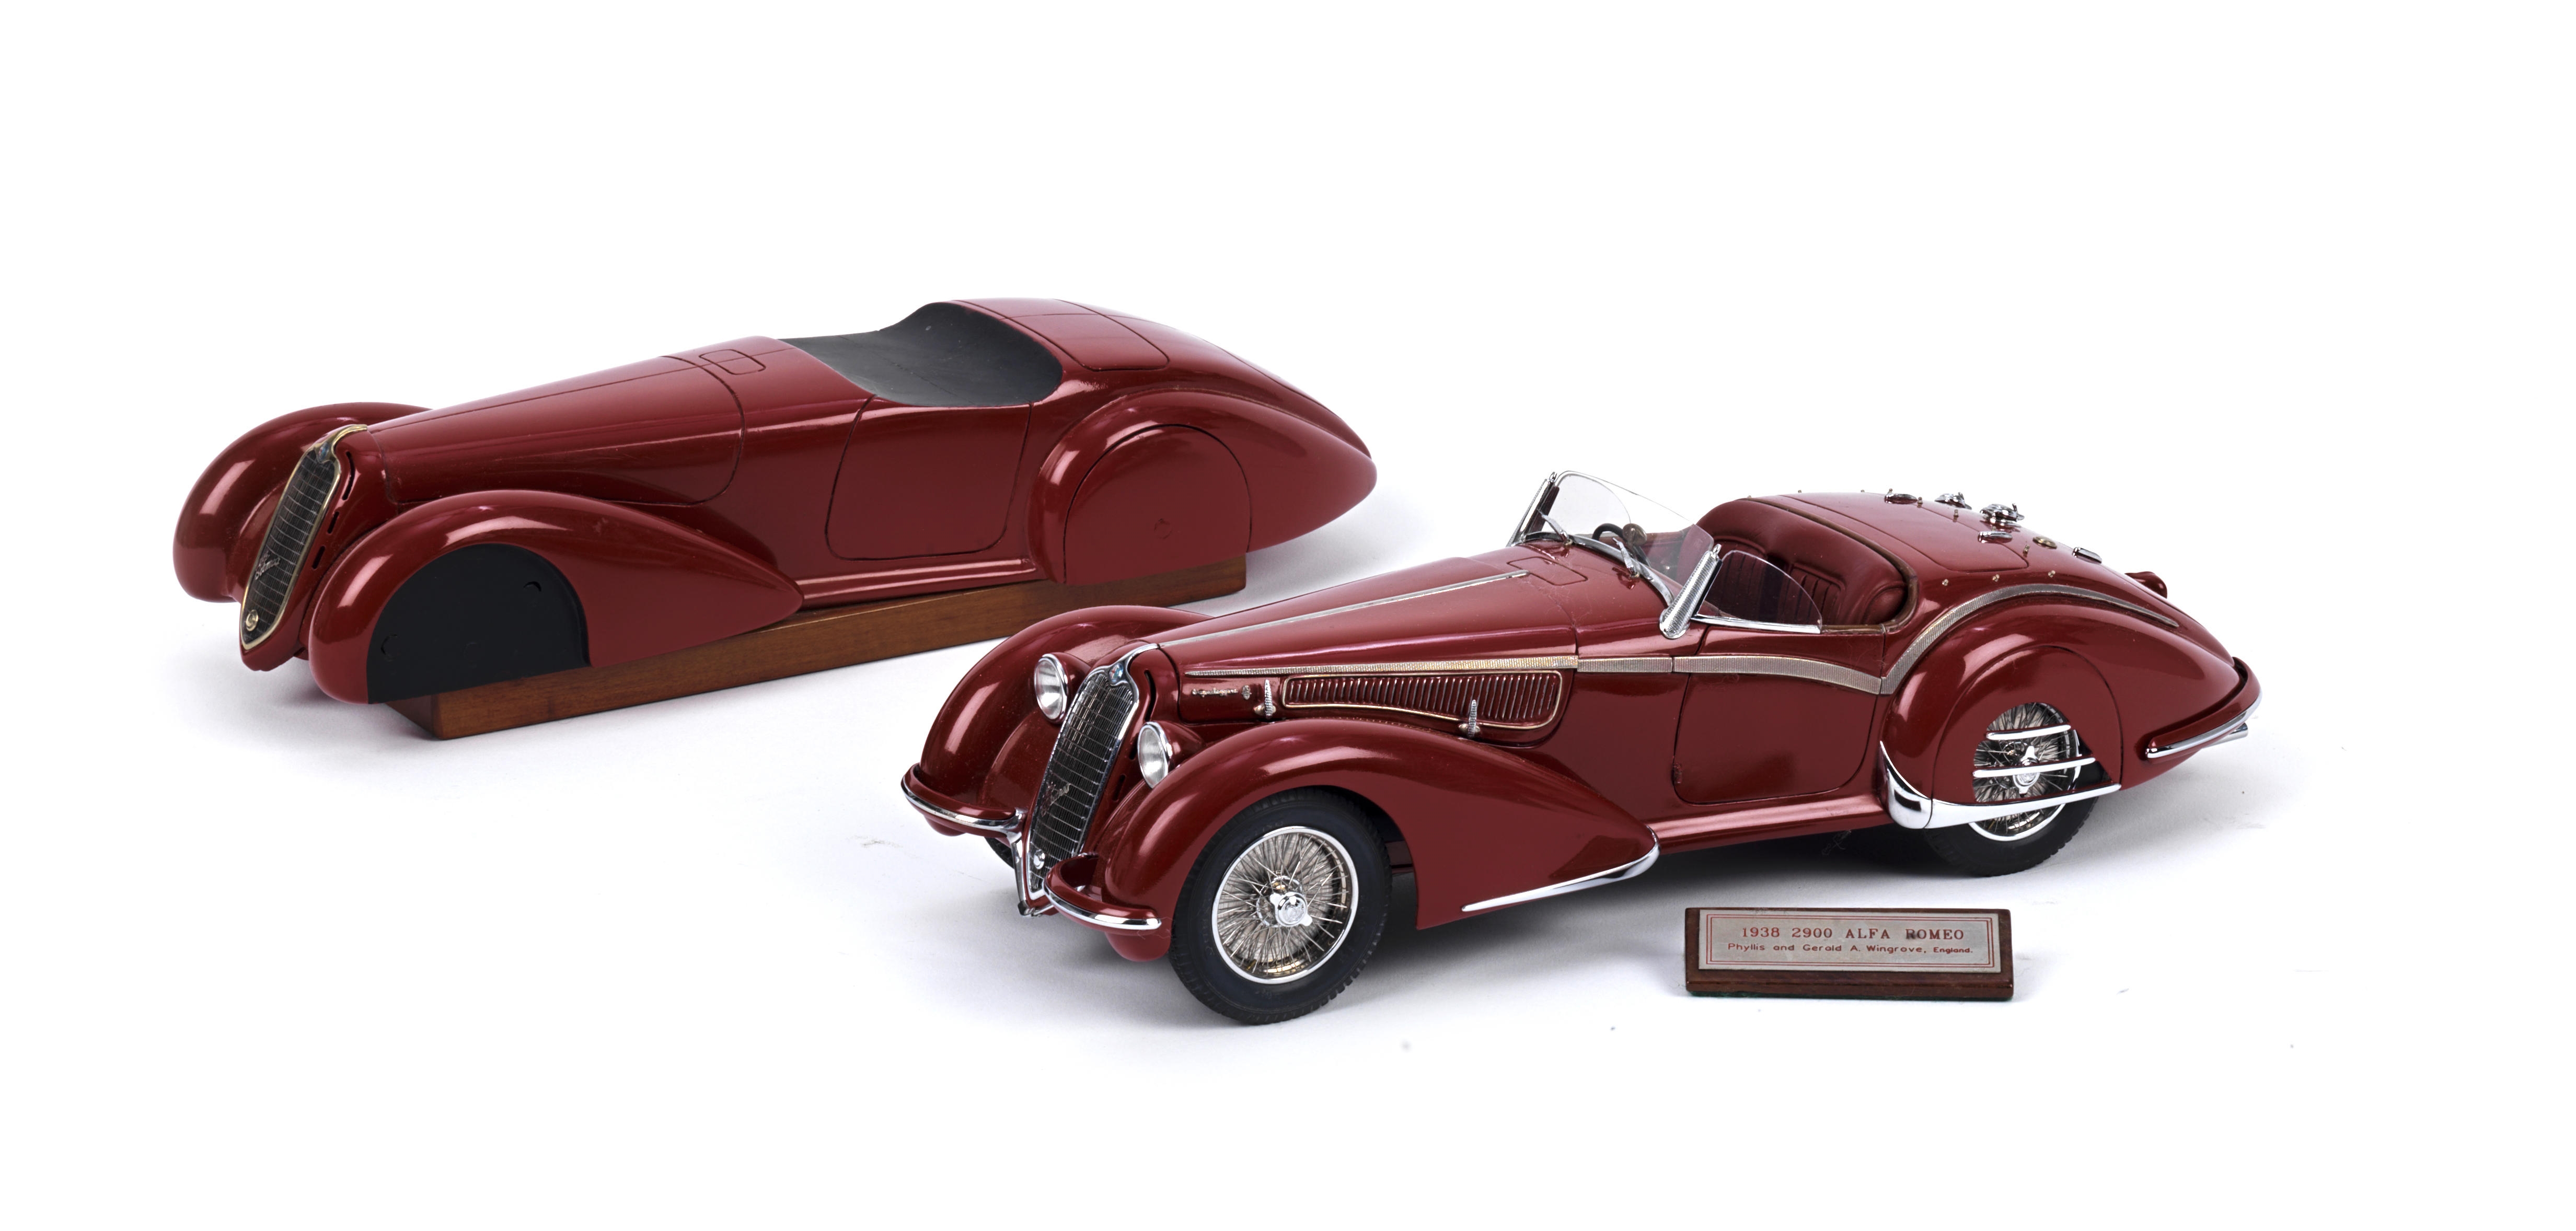 Gerald Wingrove, A 1:15 scale model of a 1938 Alfa Romeo 8C 2900 Touring  Spider and Master Pattern